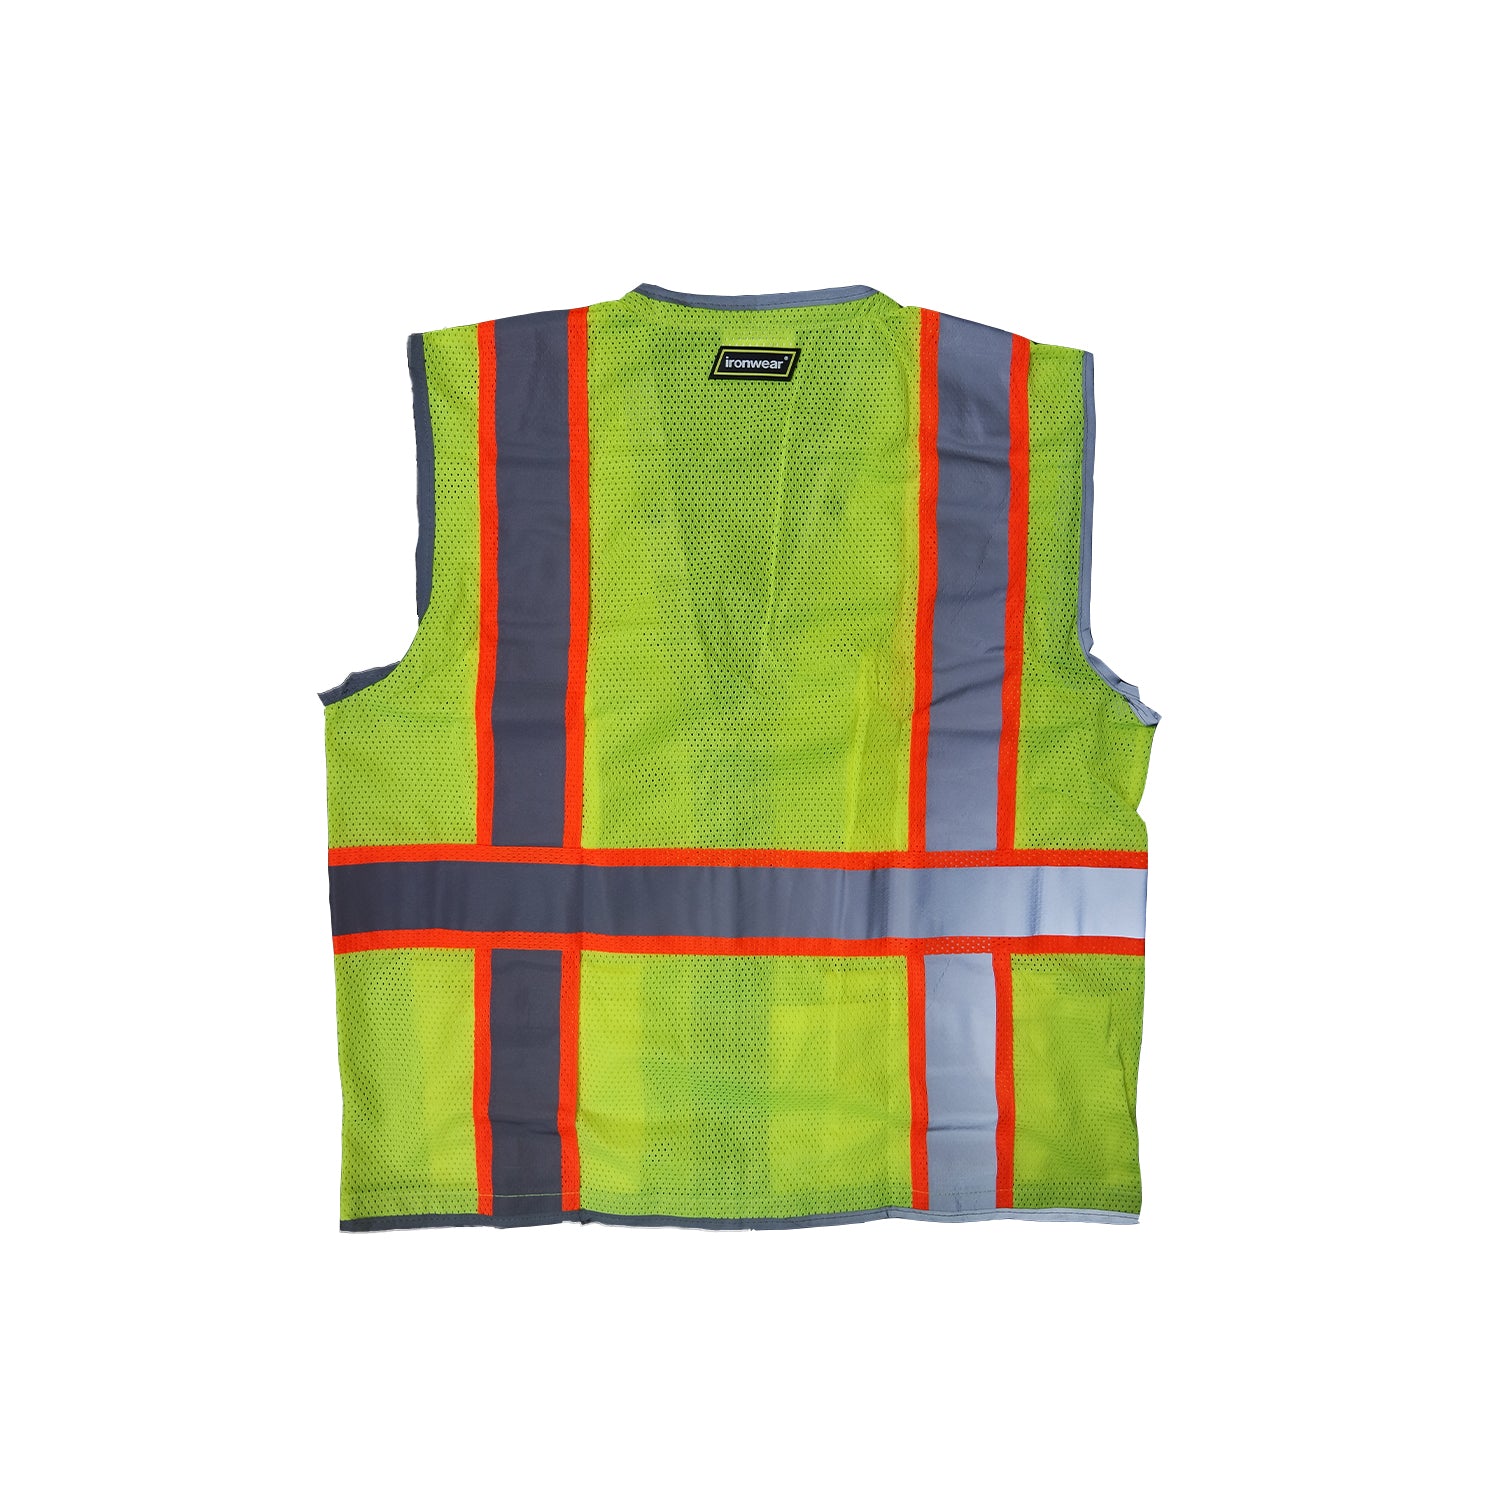 Ironwear Vest Lime 1241, ANSI Class 2, - Lime Mesh, 6 pockets -Safety- eGPS Solutions Inc.